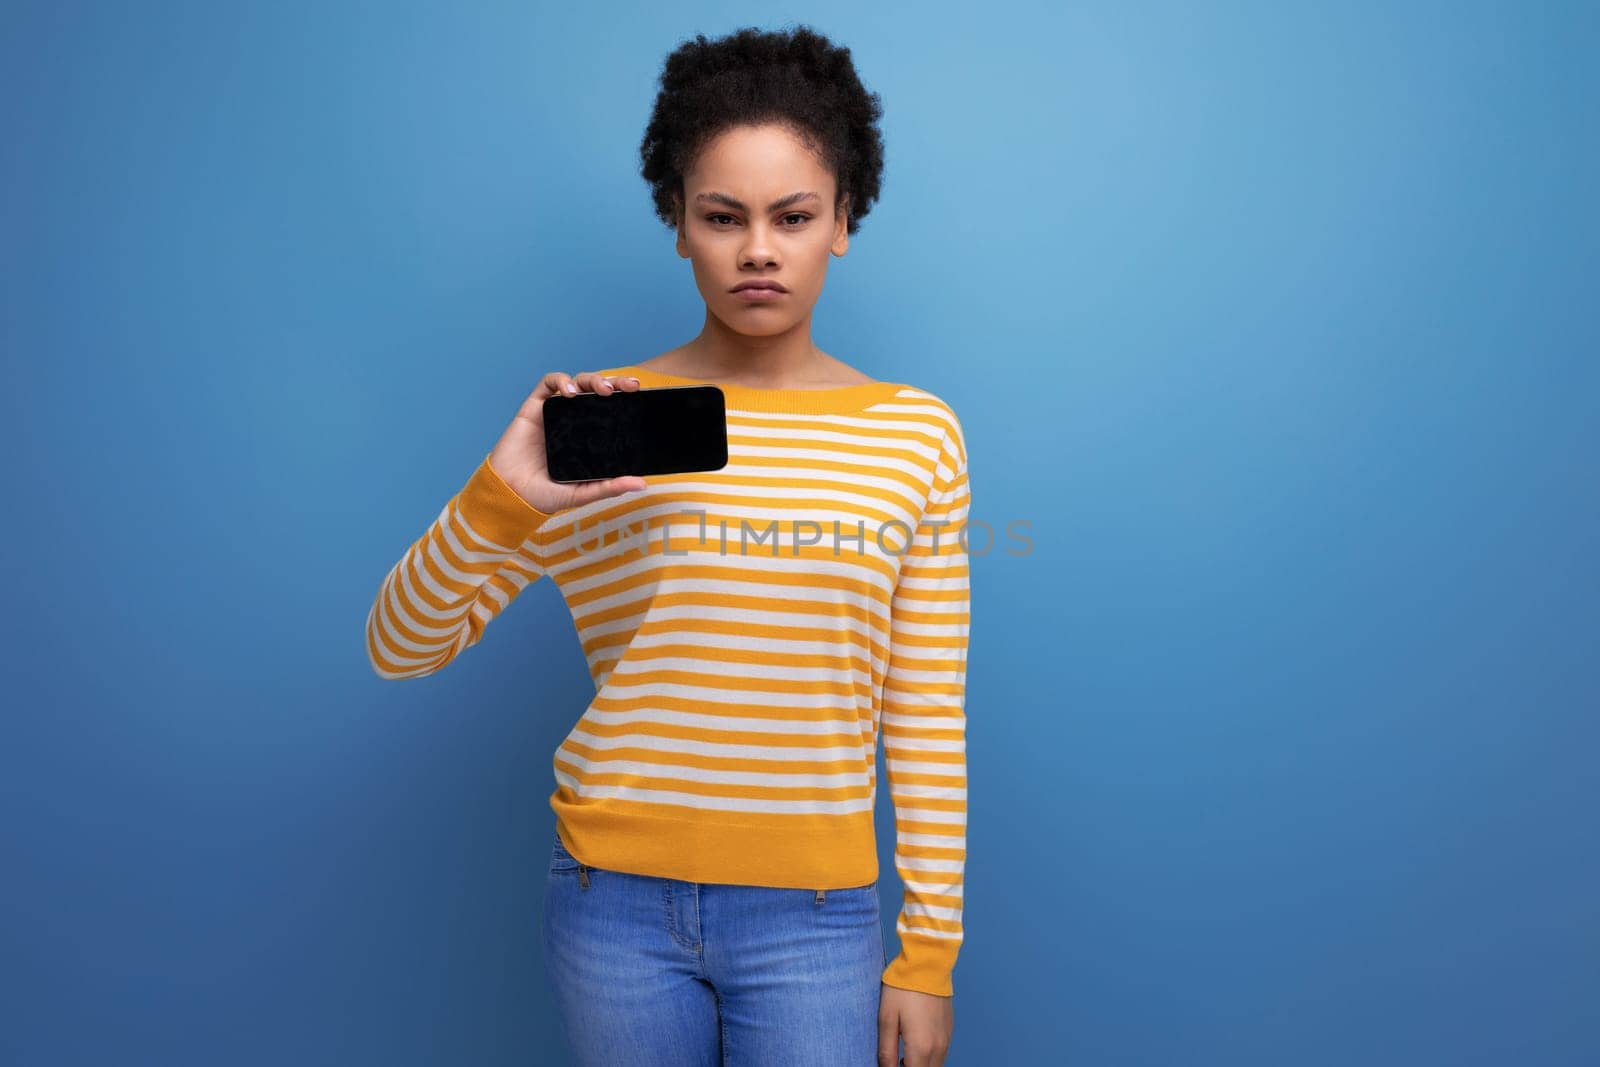 pretty latin young woman holding smartphone with mockup.